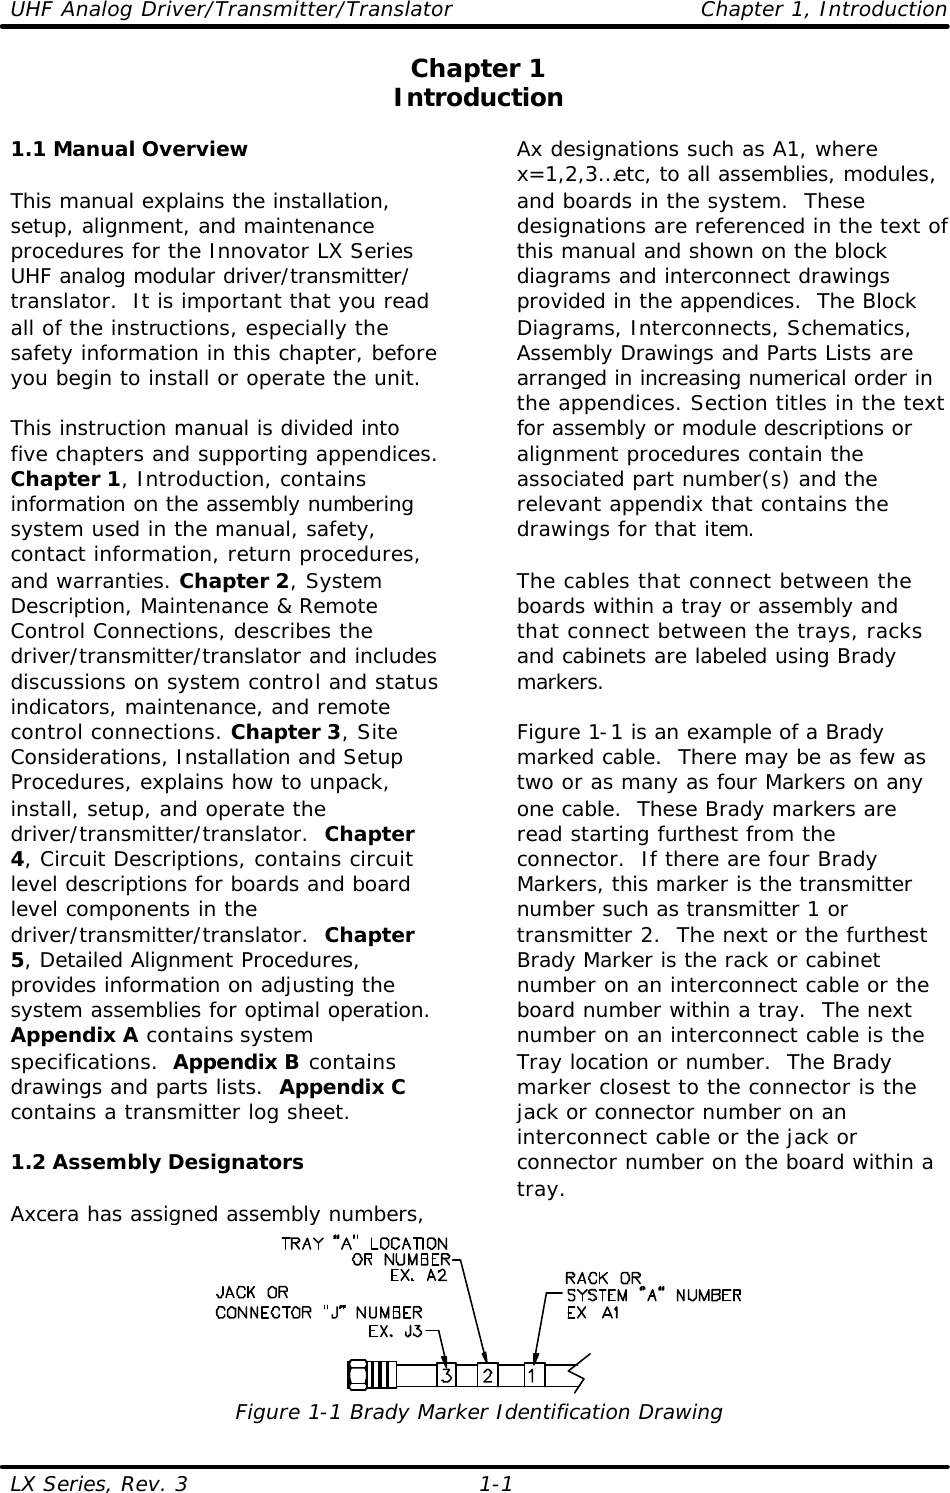 UHF Analog Driver/Transmitter/Translator Chapter 1, Introduction LX Series, Rev. 3    1-1 Chapter 1 Introduction  1.1 Manual Overview  This manual explains the installation, setup, alignment, and maintenance procedures for the Innovator LX Series UHF analog modular driver/transmitter/ translator.  It is important that you read all of the instructions, especially the safety information in this chapter, before you begin to install or operate the unit.  This instruction manual is divided into five chapters and supporting appendices. Chapter 1, Introduction, contains information on the assembly numbering system used in the manual, safety, contact information, return procedures, and warranties. Chapter 2, System Description, Maintenance &amp; Remote Control Connections, describes the driver/transmitter/translator and includes discussions on system control and status indicators, maintenance, and remote control connections. Chapter 3, Site Considerations, Installation and Setup Procedures, explains how to unpack, install, setup, and operate the driver/transmitter/translator.  Chapter 4, Circuit Descriptions, contains circuit level descriptions for boards and board level components in the driver/transmitter/translator.  Chapter 5, Detailed Alignment Procedures, provides information on adjusting the system assemblies for optimal operation.  Appendix A contains system specifications.  Appendix B contains drawings and parts lists.  Appendix C contains a transmitter log sheet.    1.2 Assembly Designators  Axcera has assigned assembly numbers, Ax designations such as A1, where x=1,2,3…etc, to all assemblies, modules, and boards in the system.  These designations are referenced in the text of this manual and shown on the block diagrams and interconnect drawings provided in the appendices.  The Block Diagrams, Interconnects, Schematics, Assembly Drawings and Parts Lists are arranged in increasing numerical order in the appendices. Section titles in the text for assembly or module descriptions or alignment procedures contain the associated part number(s) and the relevant appendix that contains the drawings for that item.   The cables that connect between the boards within a tray or assembly and that connect between the trays, racks and cabinets are labeled using Brady markers.   Figure 1-1 is an example of a Brady marked cable.  There may be as few as two or as many as four Markers on any one cable.  These Brady markers are read starting furthest from the connector.  If there are four Brady Markers, this marker is the transmitter number such as transmitter 1 or transmitter 2.  The next or the furthest Brady Marker is the rack or cabinet number on an interconnect cable or the board number within a tray.  The next number on an interconnect cable is the Tray location or number.  The Brady marker closest to the connector is the jack or connector number on an interconnect cable or the jack or connector number on the board within a tray.  Figure 1-1 Brady Marker Identification Drawing 